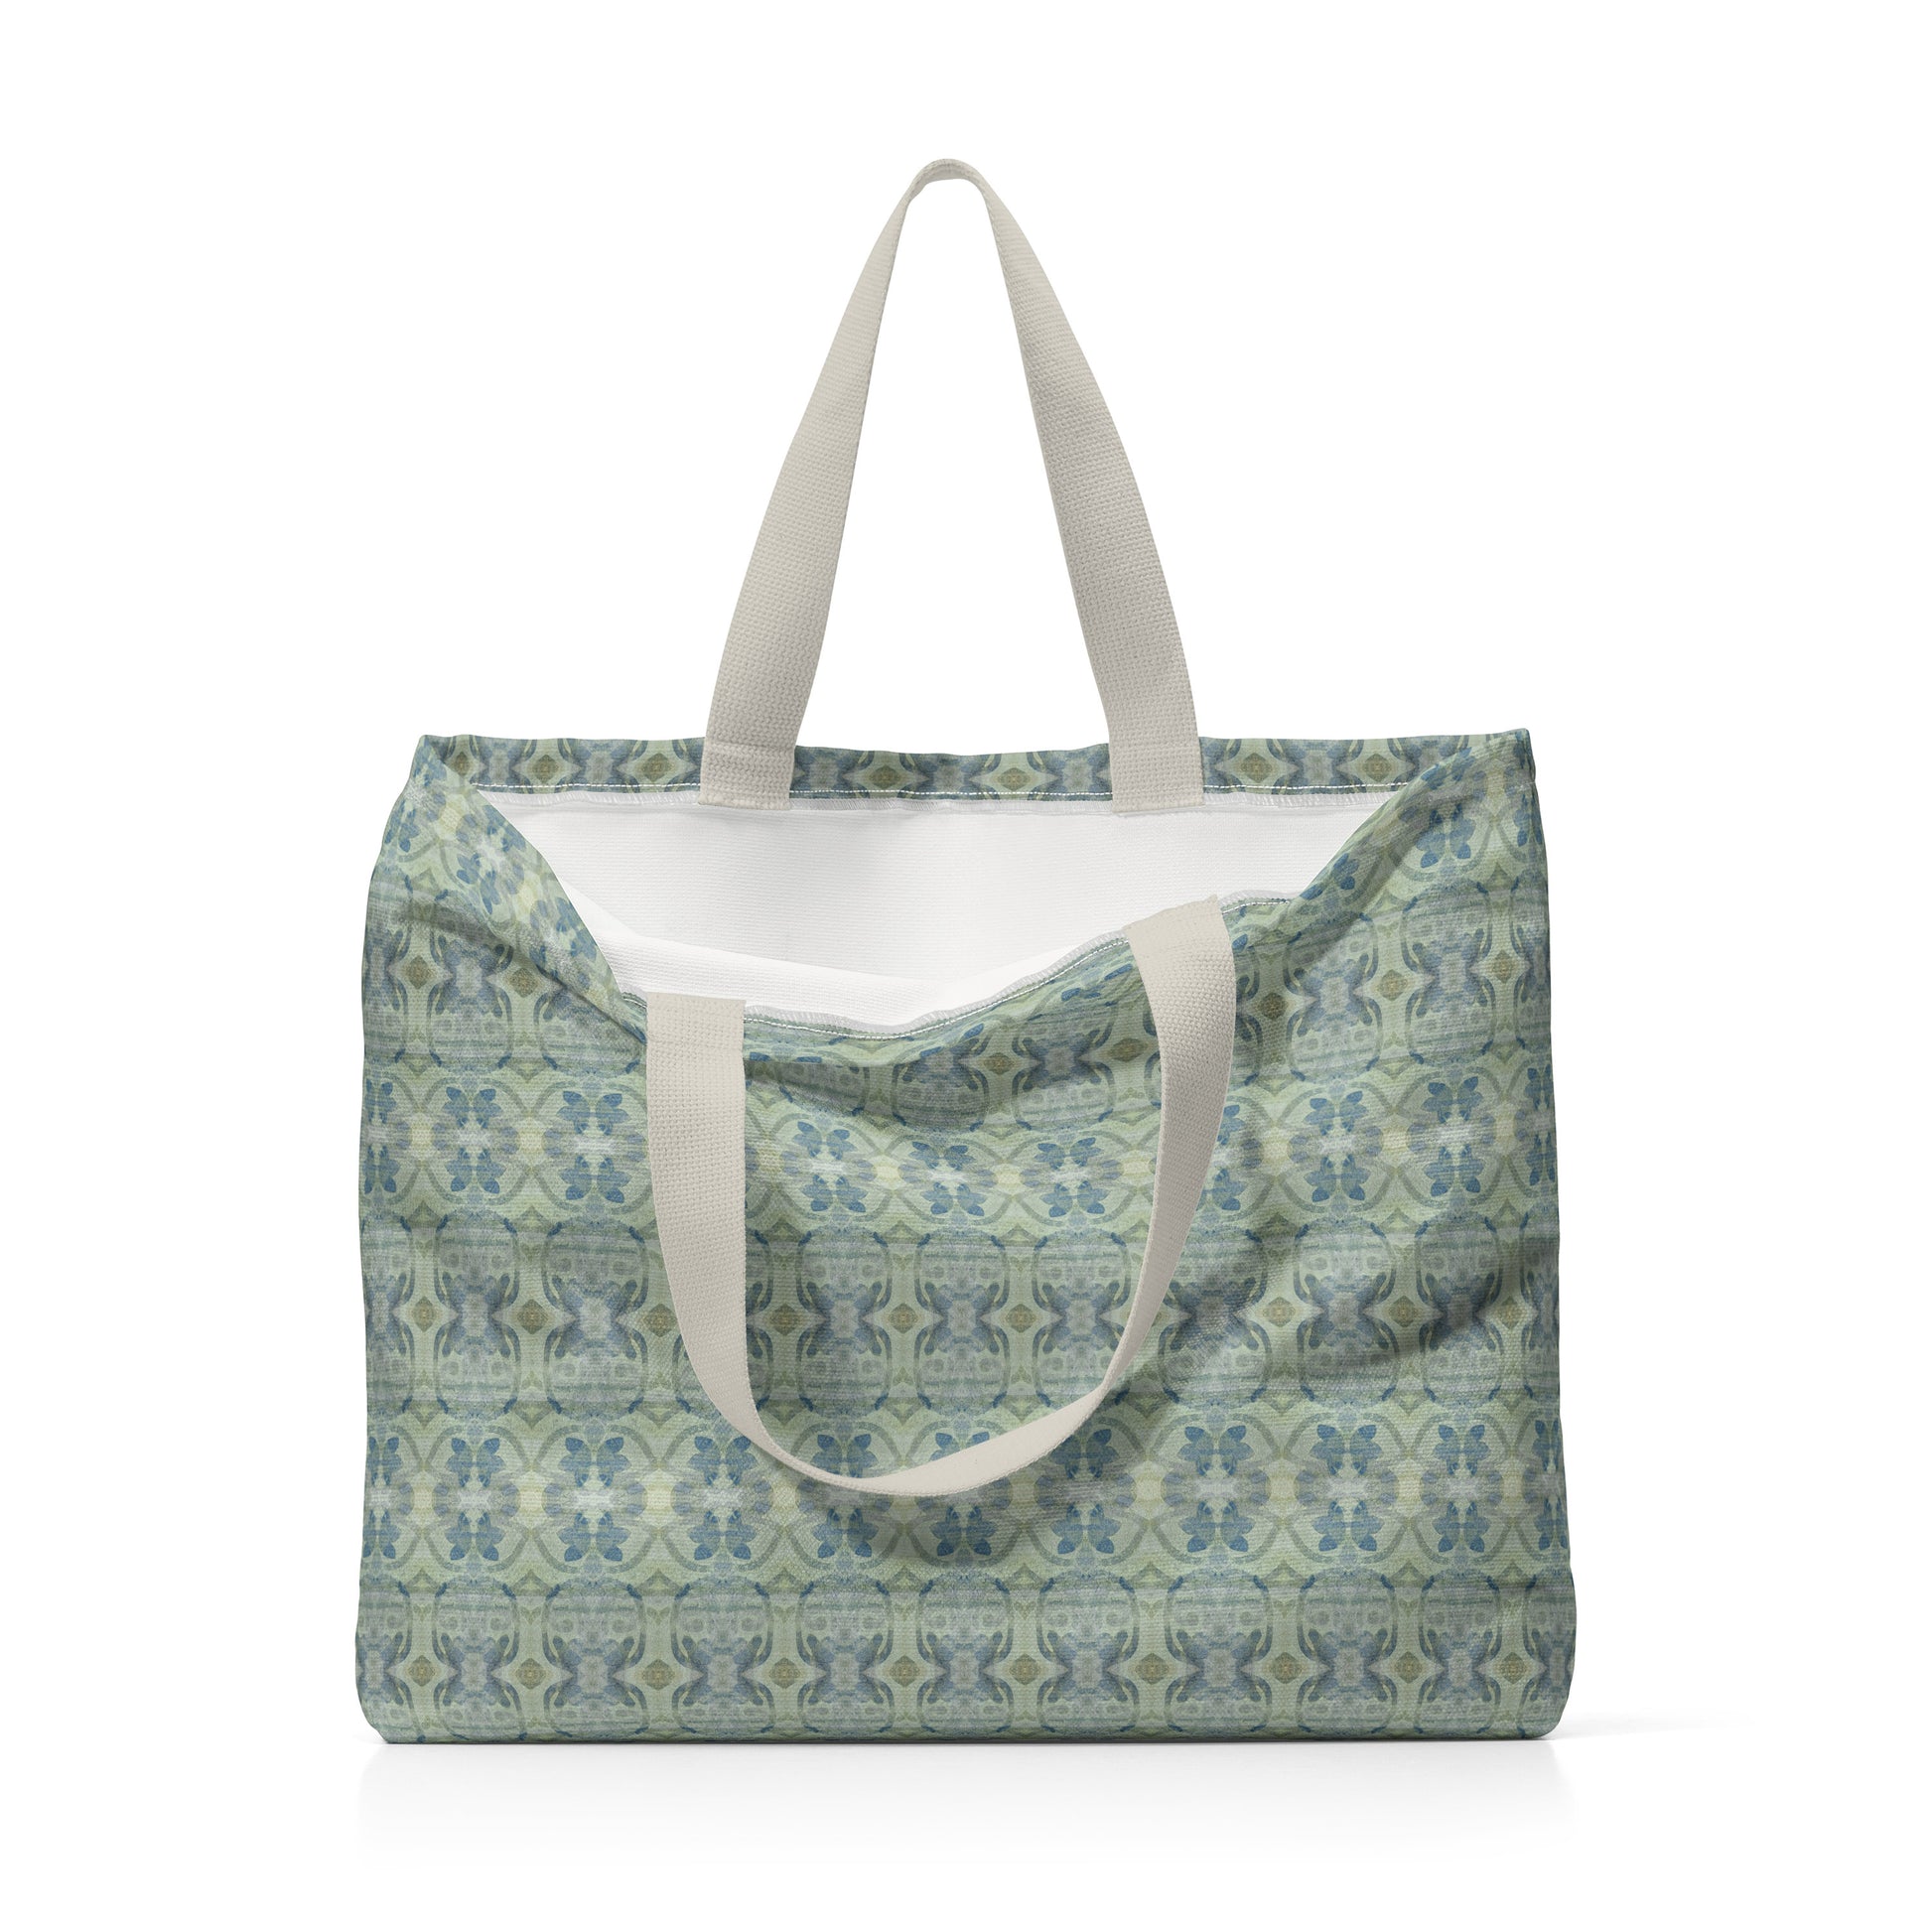 Canvas tote bag featuring an abstract blue and green pattern